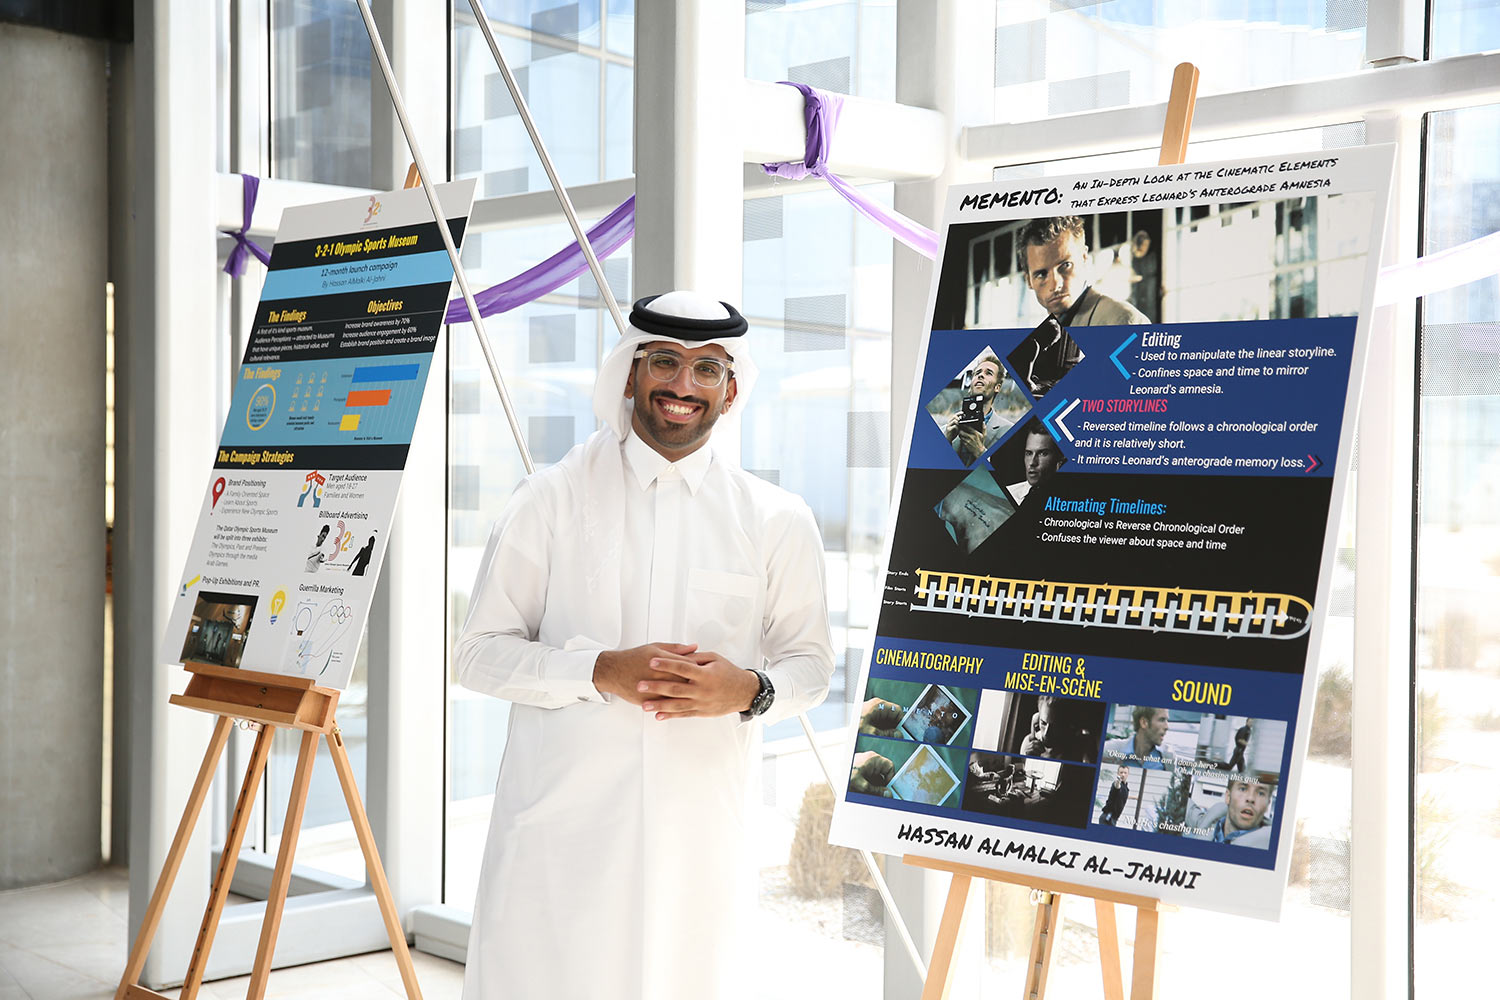 Student Hassan Al-Jahni won awards for creative writing and strategic communication